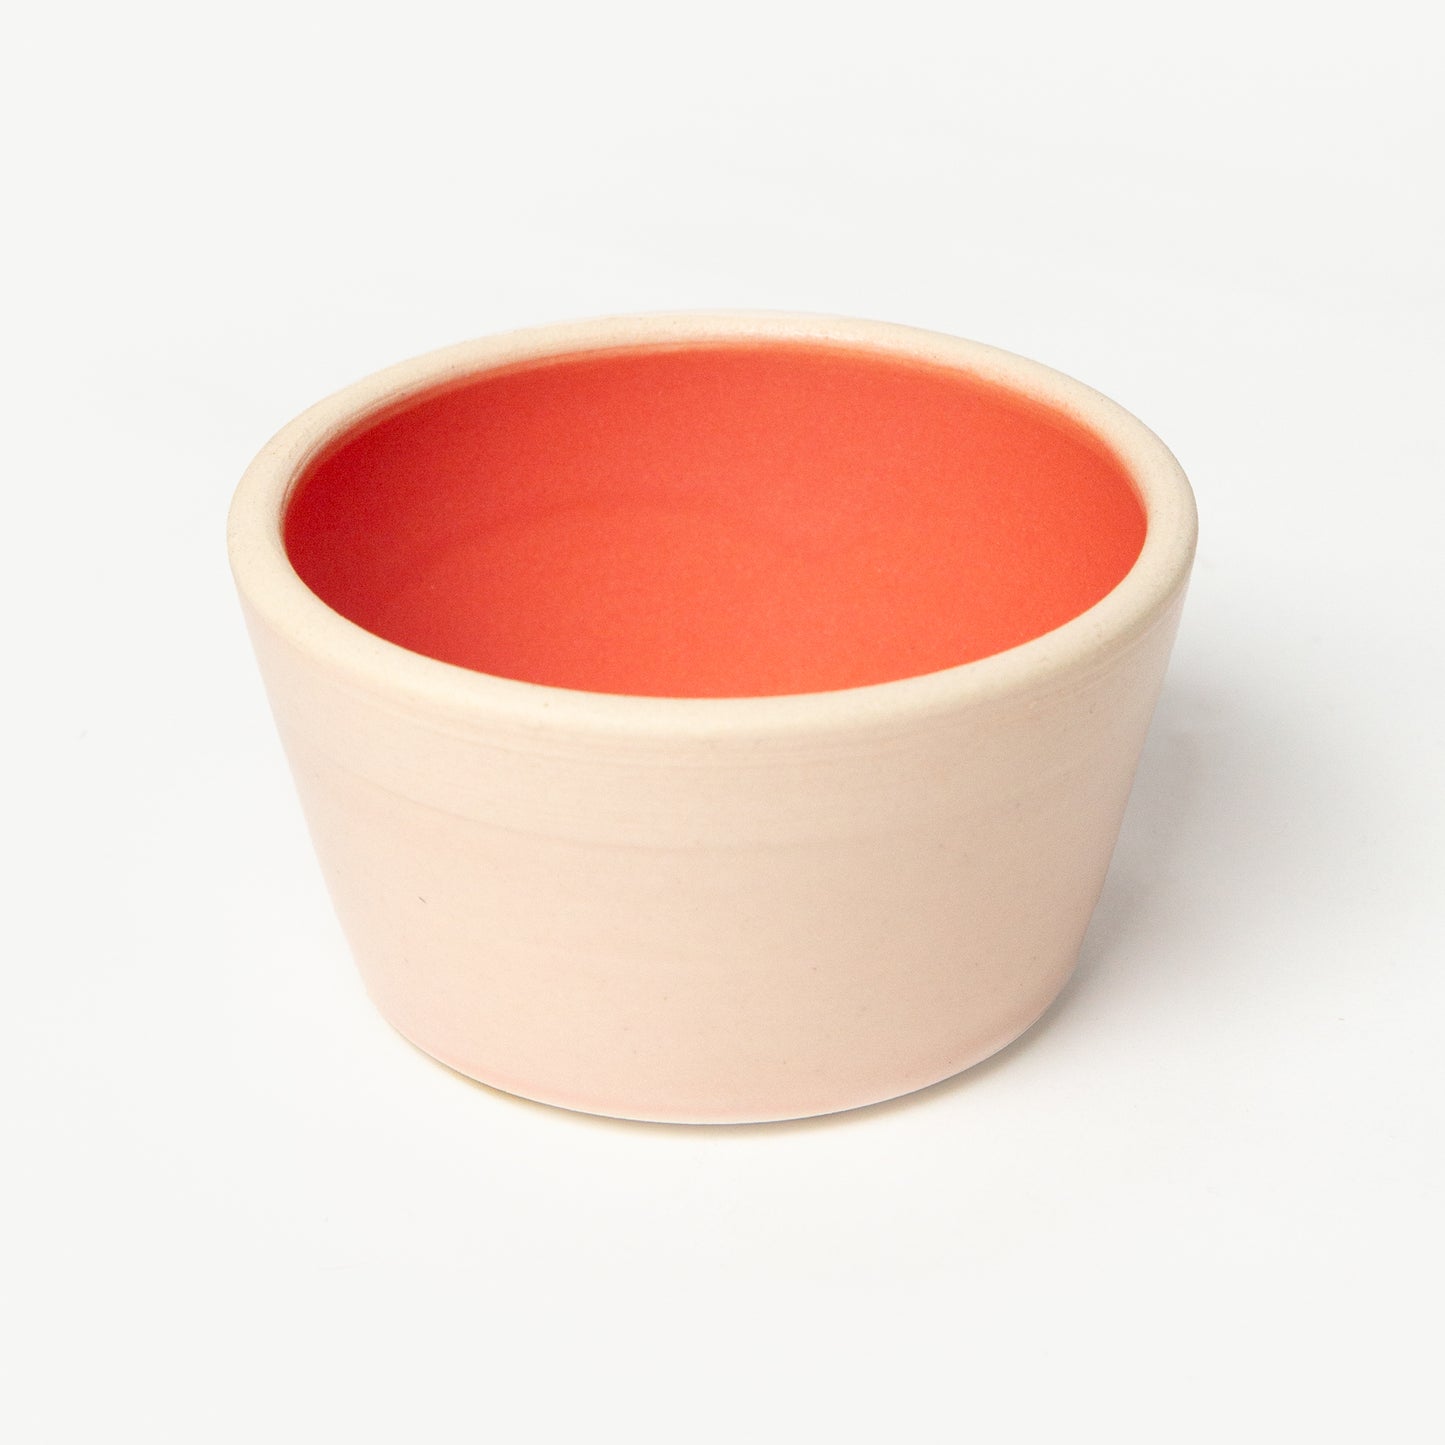 Small Dish in Peach and Bright Red